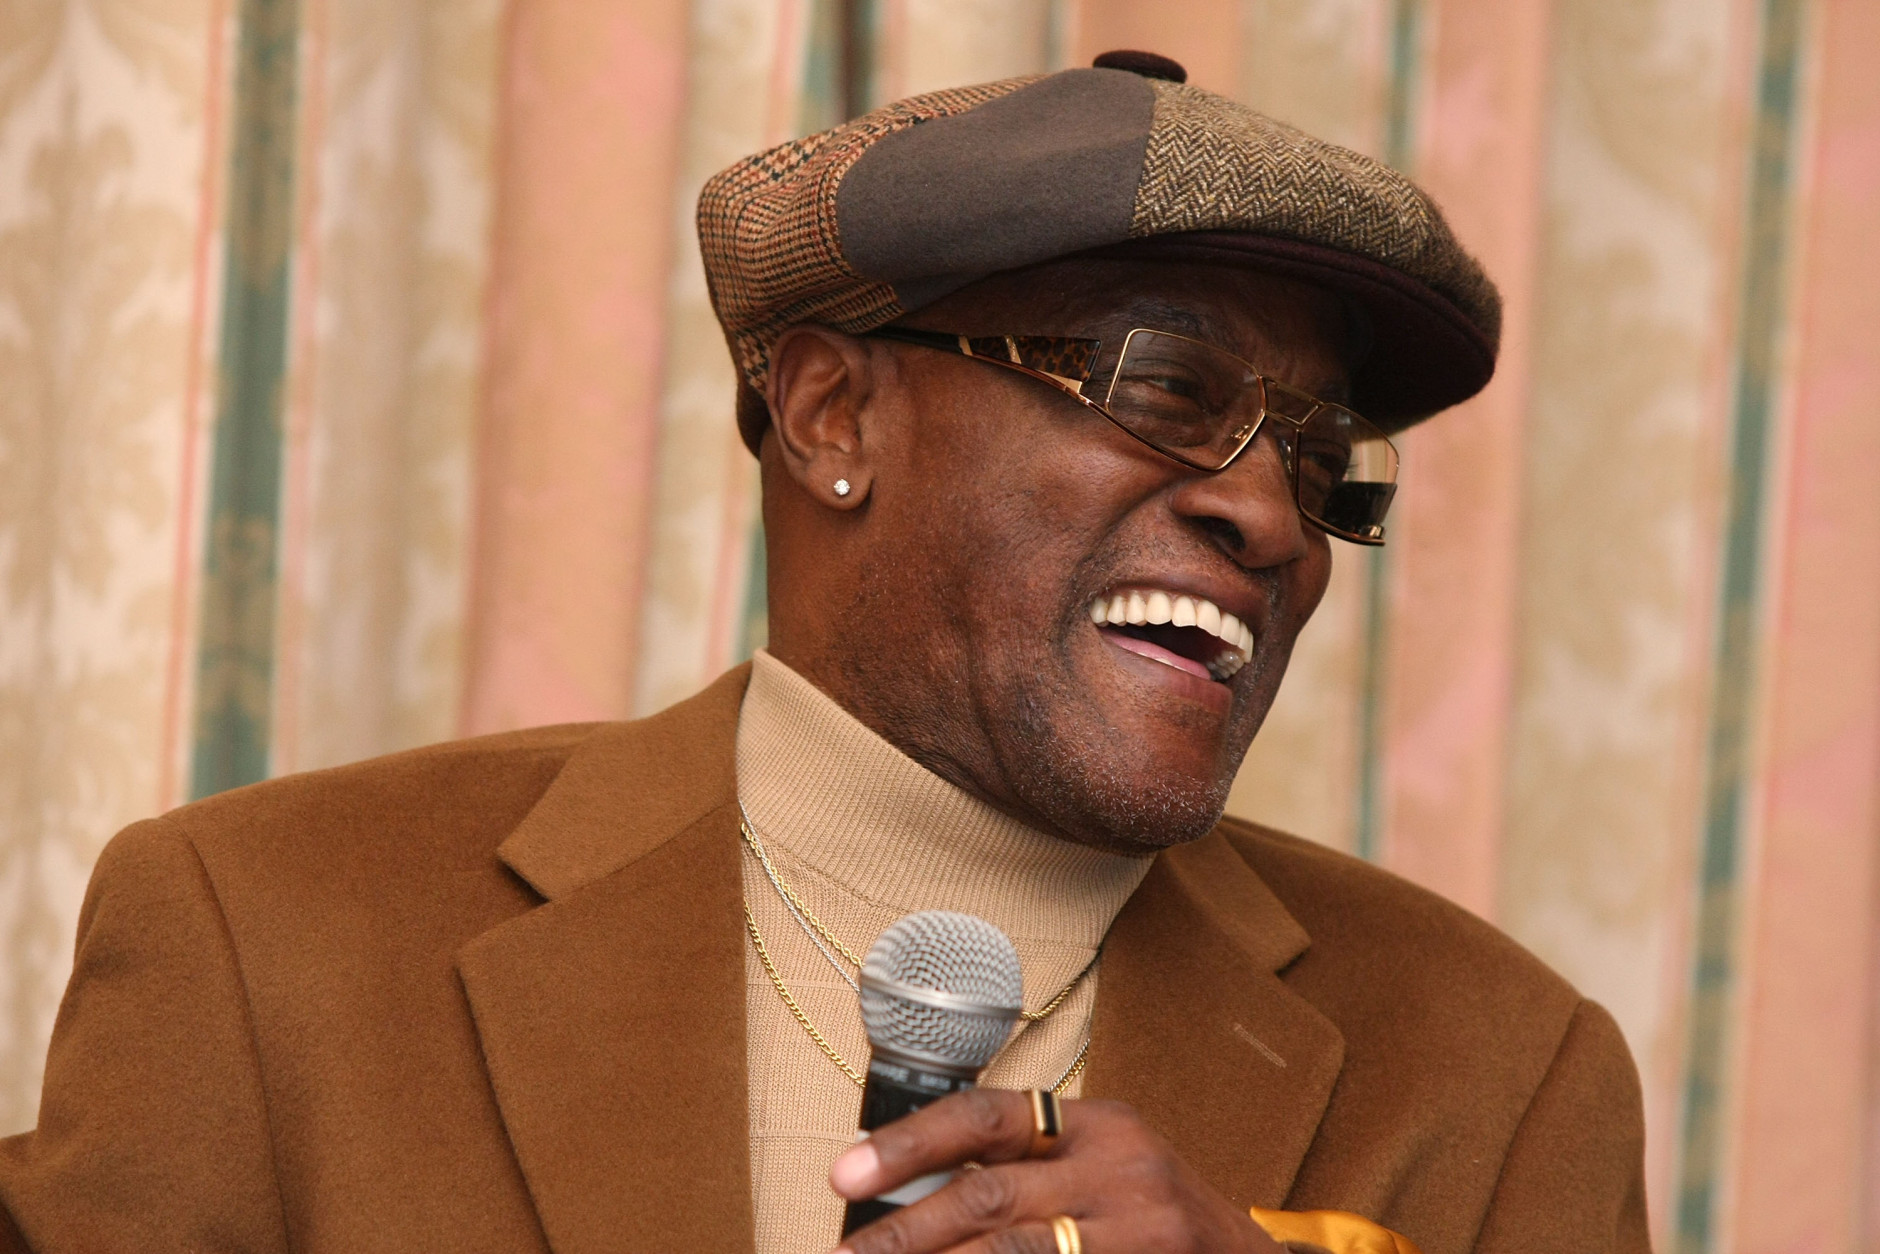 FILE -- Billy Paul speaks at the Pre-GRAMMY Party at the Four Seasons Hotel on February 6, 2008 in Beverly Hills, California.  (Photo by Noel Vasquez/Getty Images)